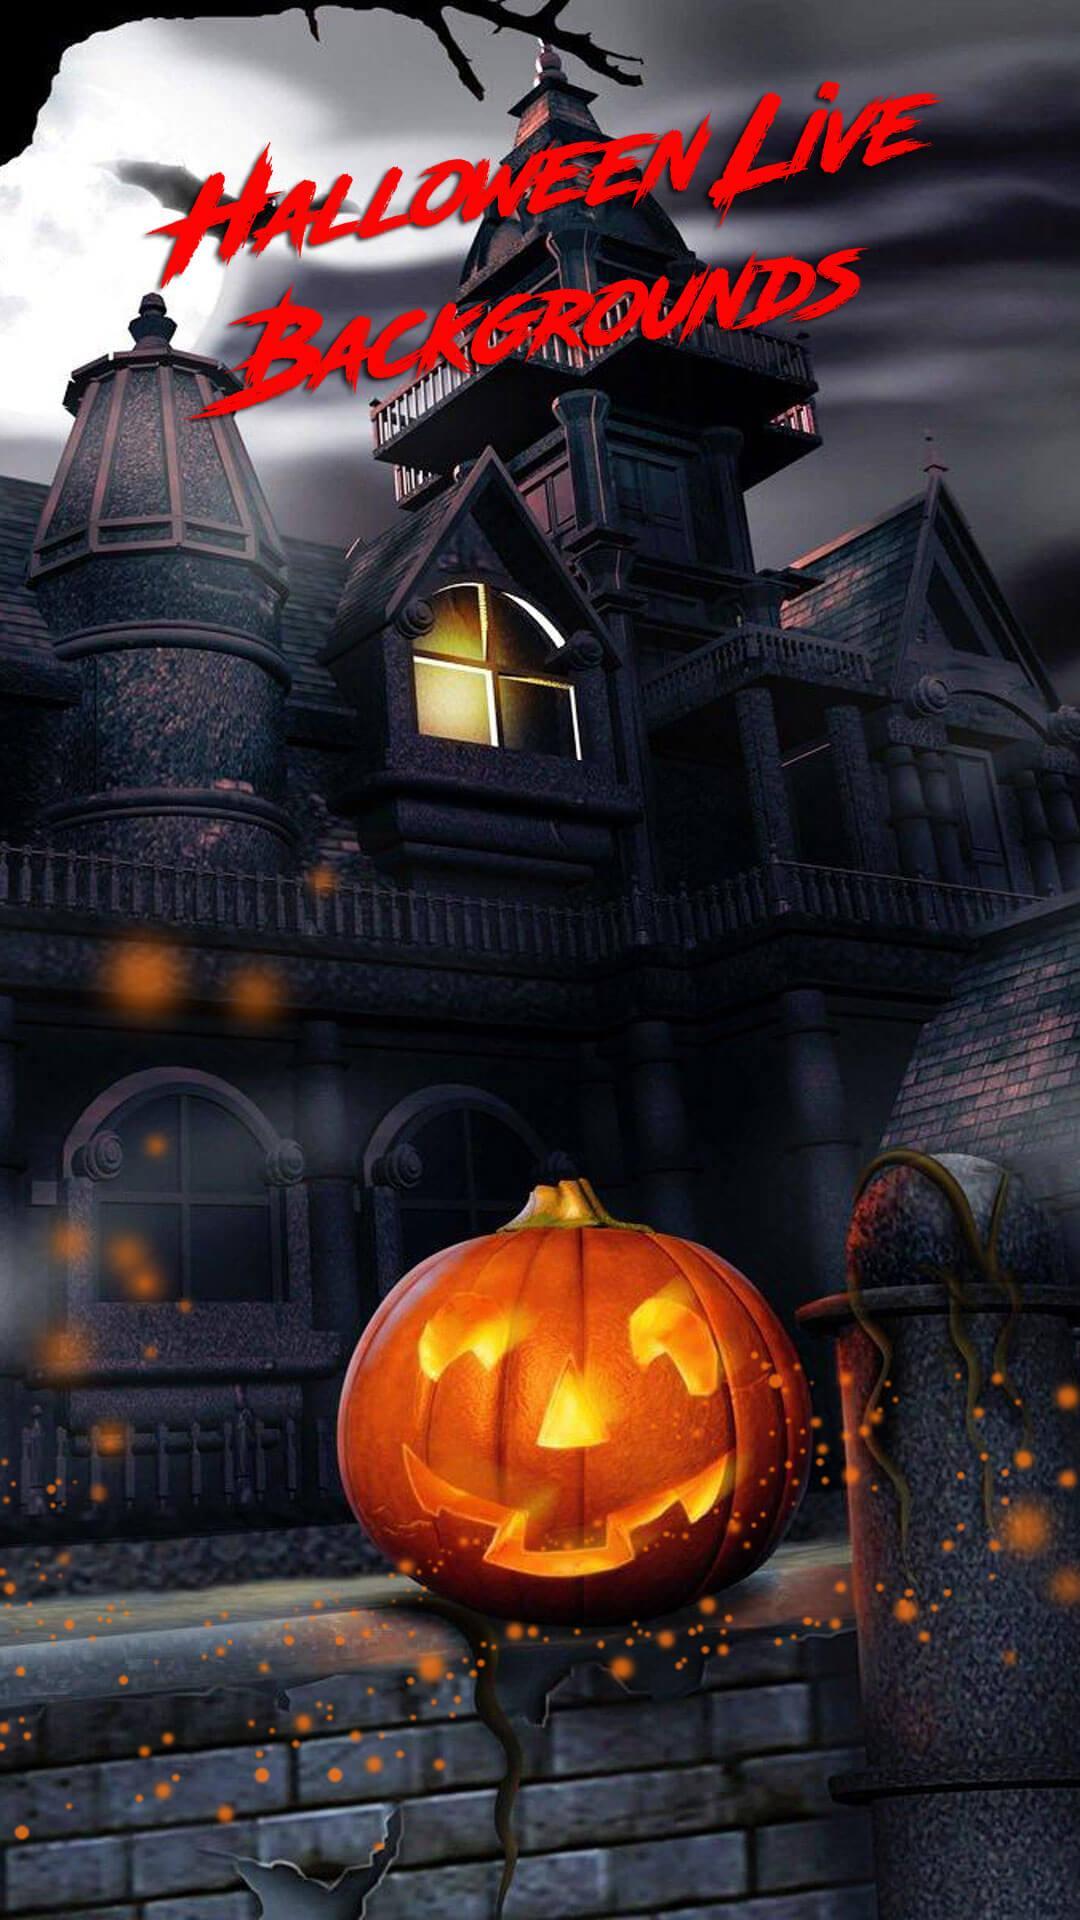 Halloween  Live Wallpapers for iPhone  Android Video  Halloween live  wallpaper Halloween wallpaper backgrounds Halloween wallpaper cute